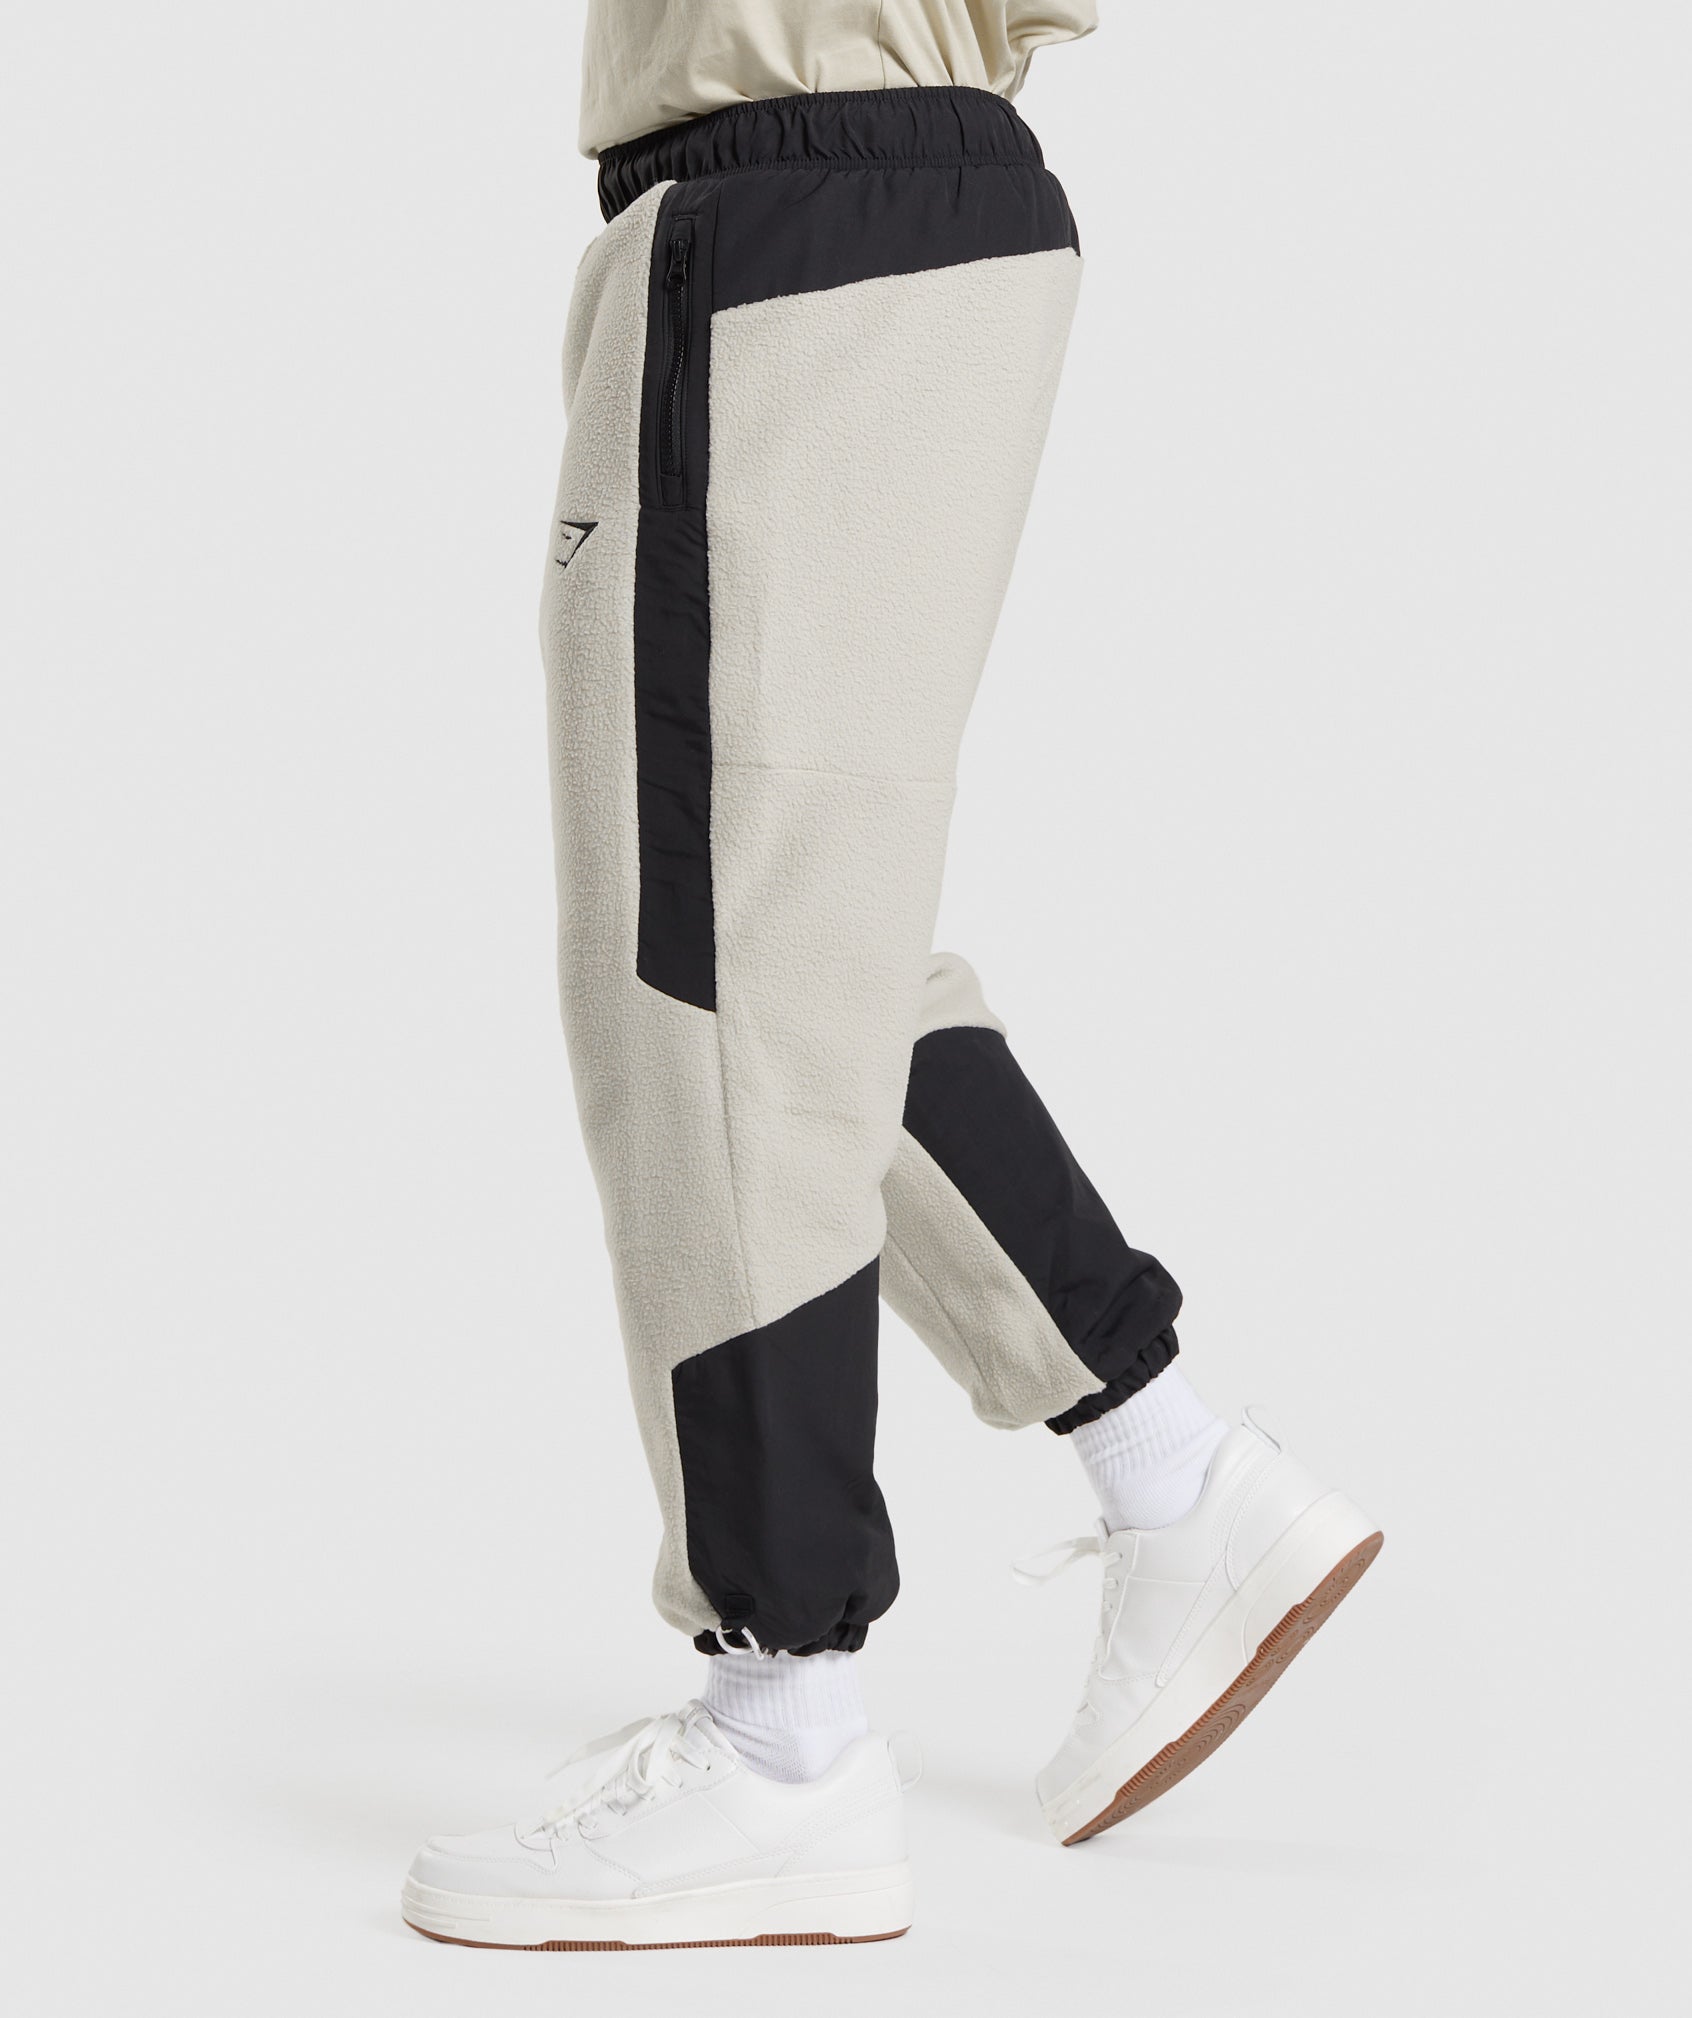 Vibes Joggers in Pebble Grey/Black - view 3